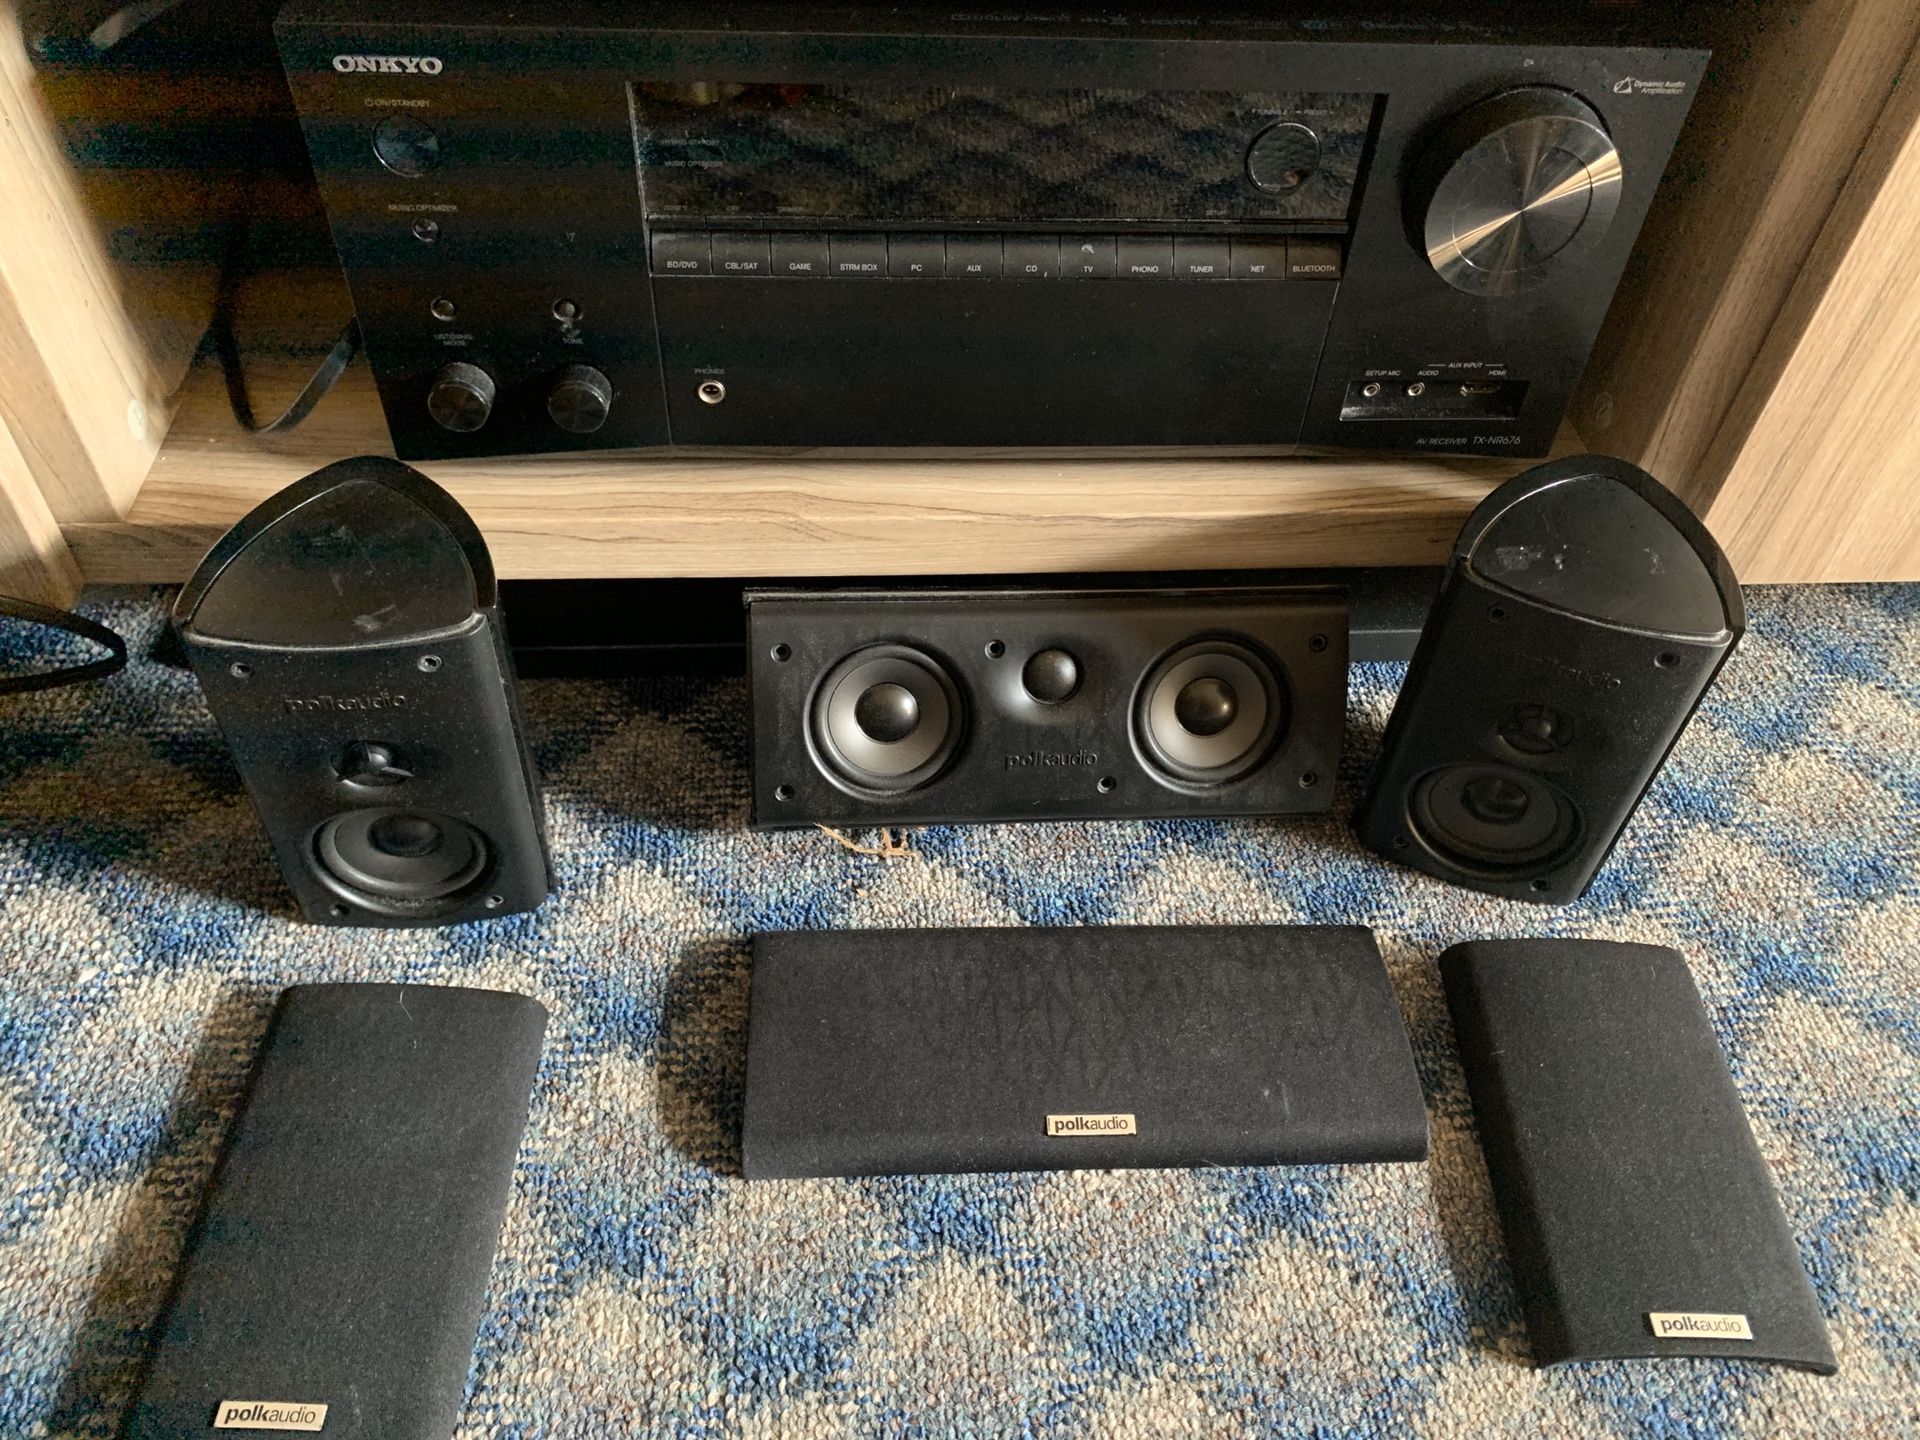 5.1 Polk audio surround sound with onkyo receiver and Yamaha subwoofer